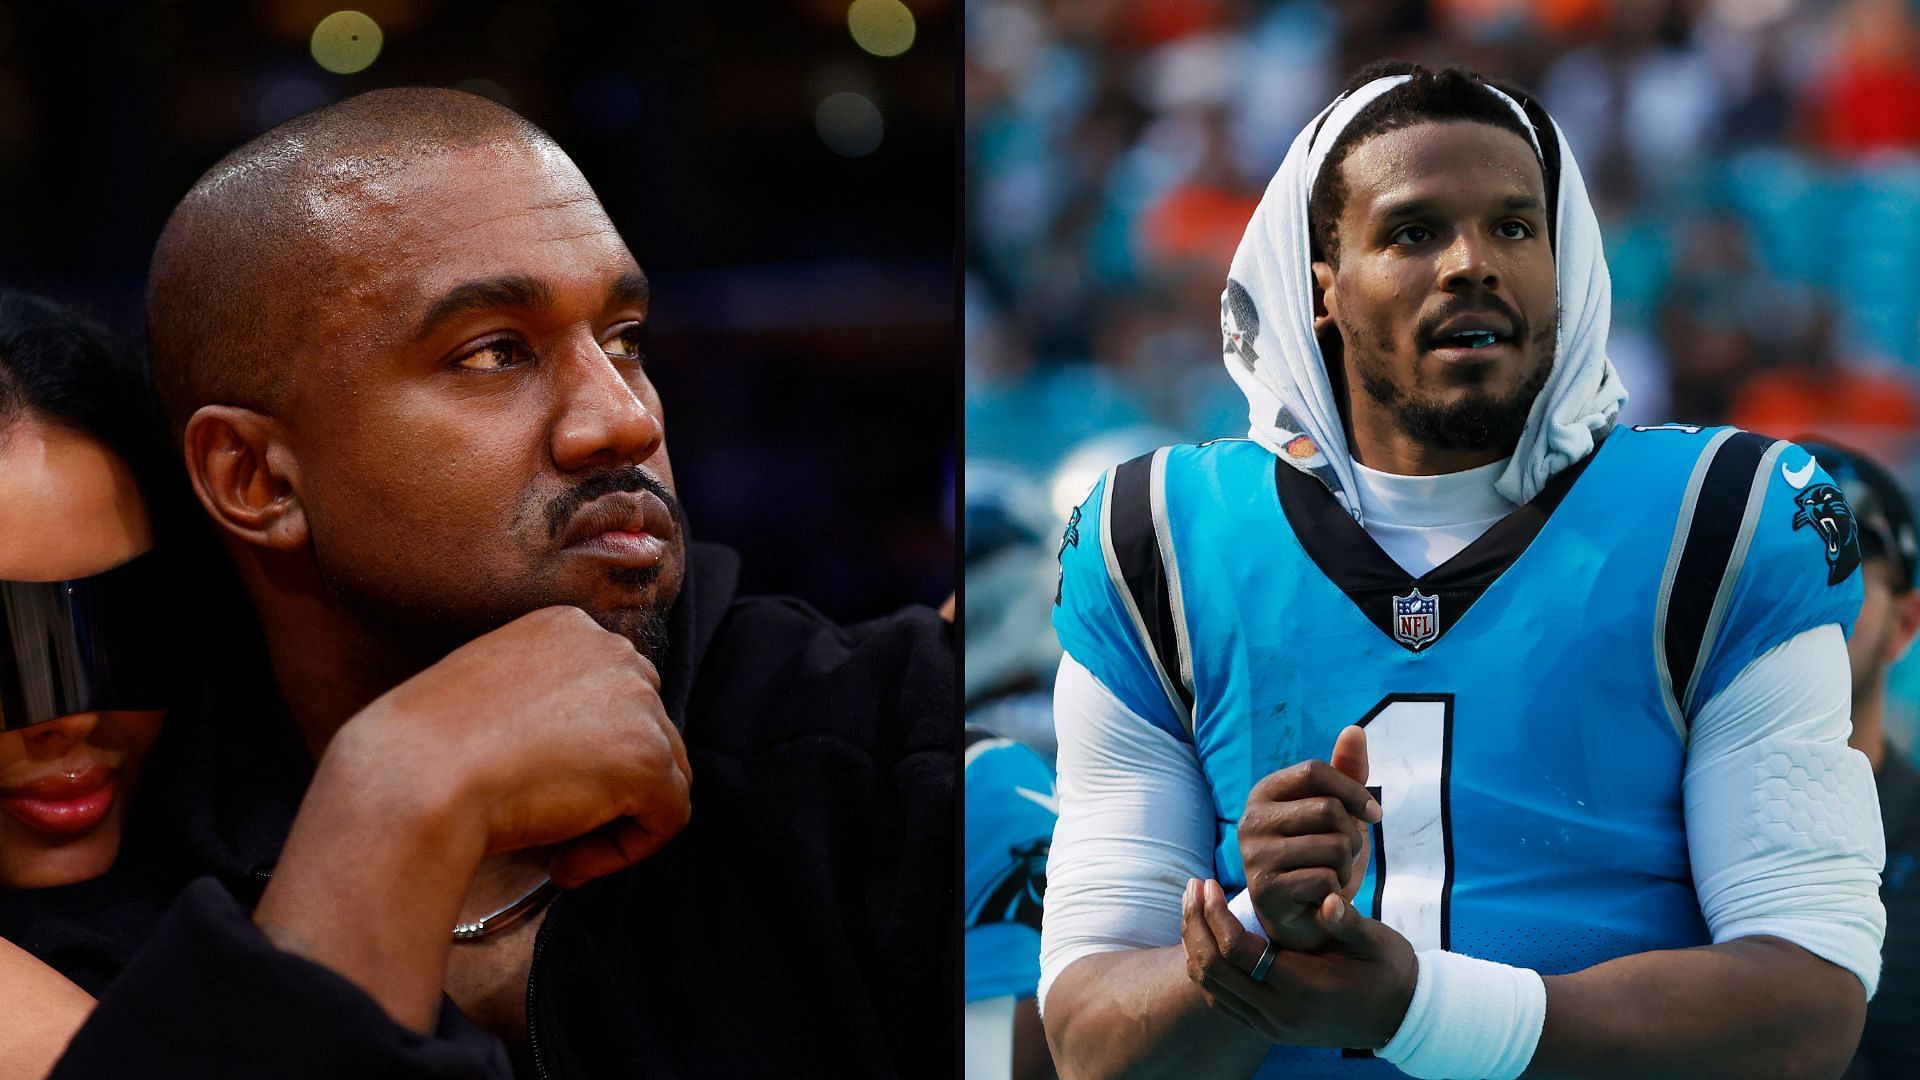 Cam Newton drops F-bomb, channels Kanye West to settle Hall of Fame debate 